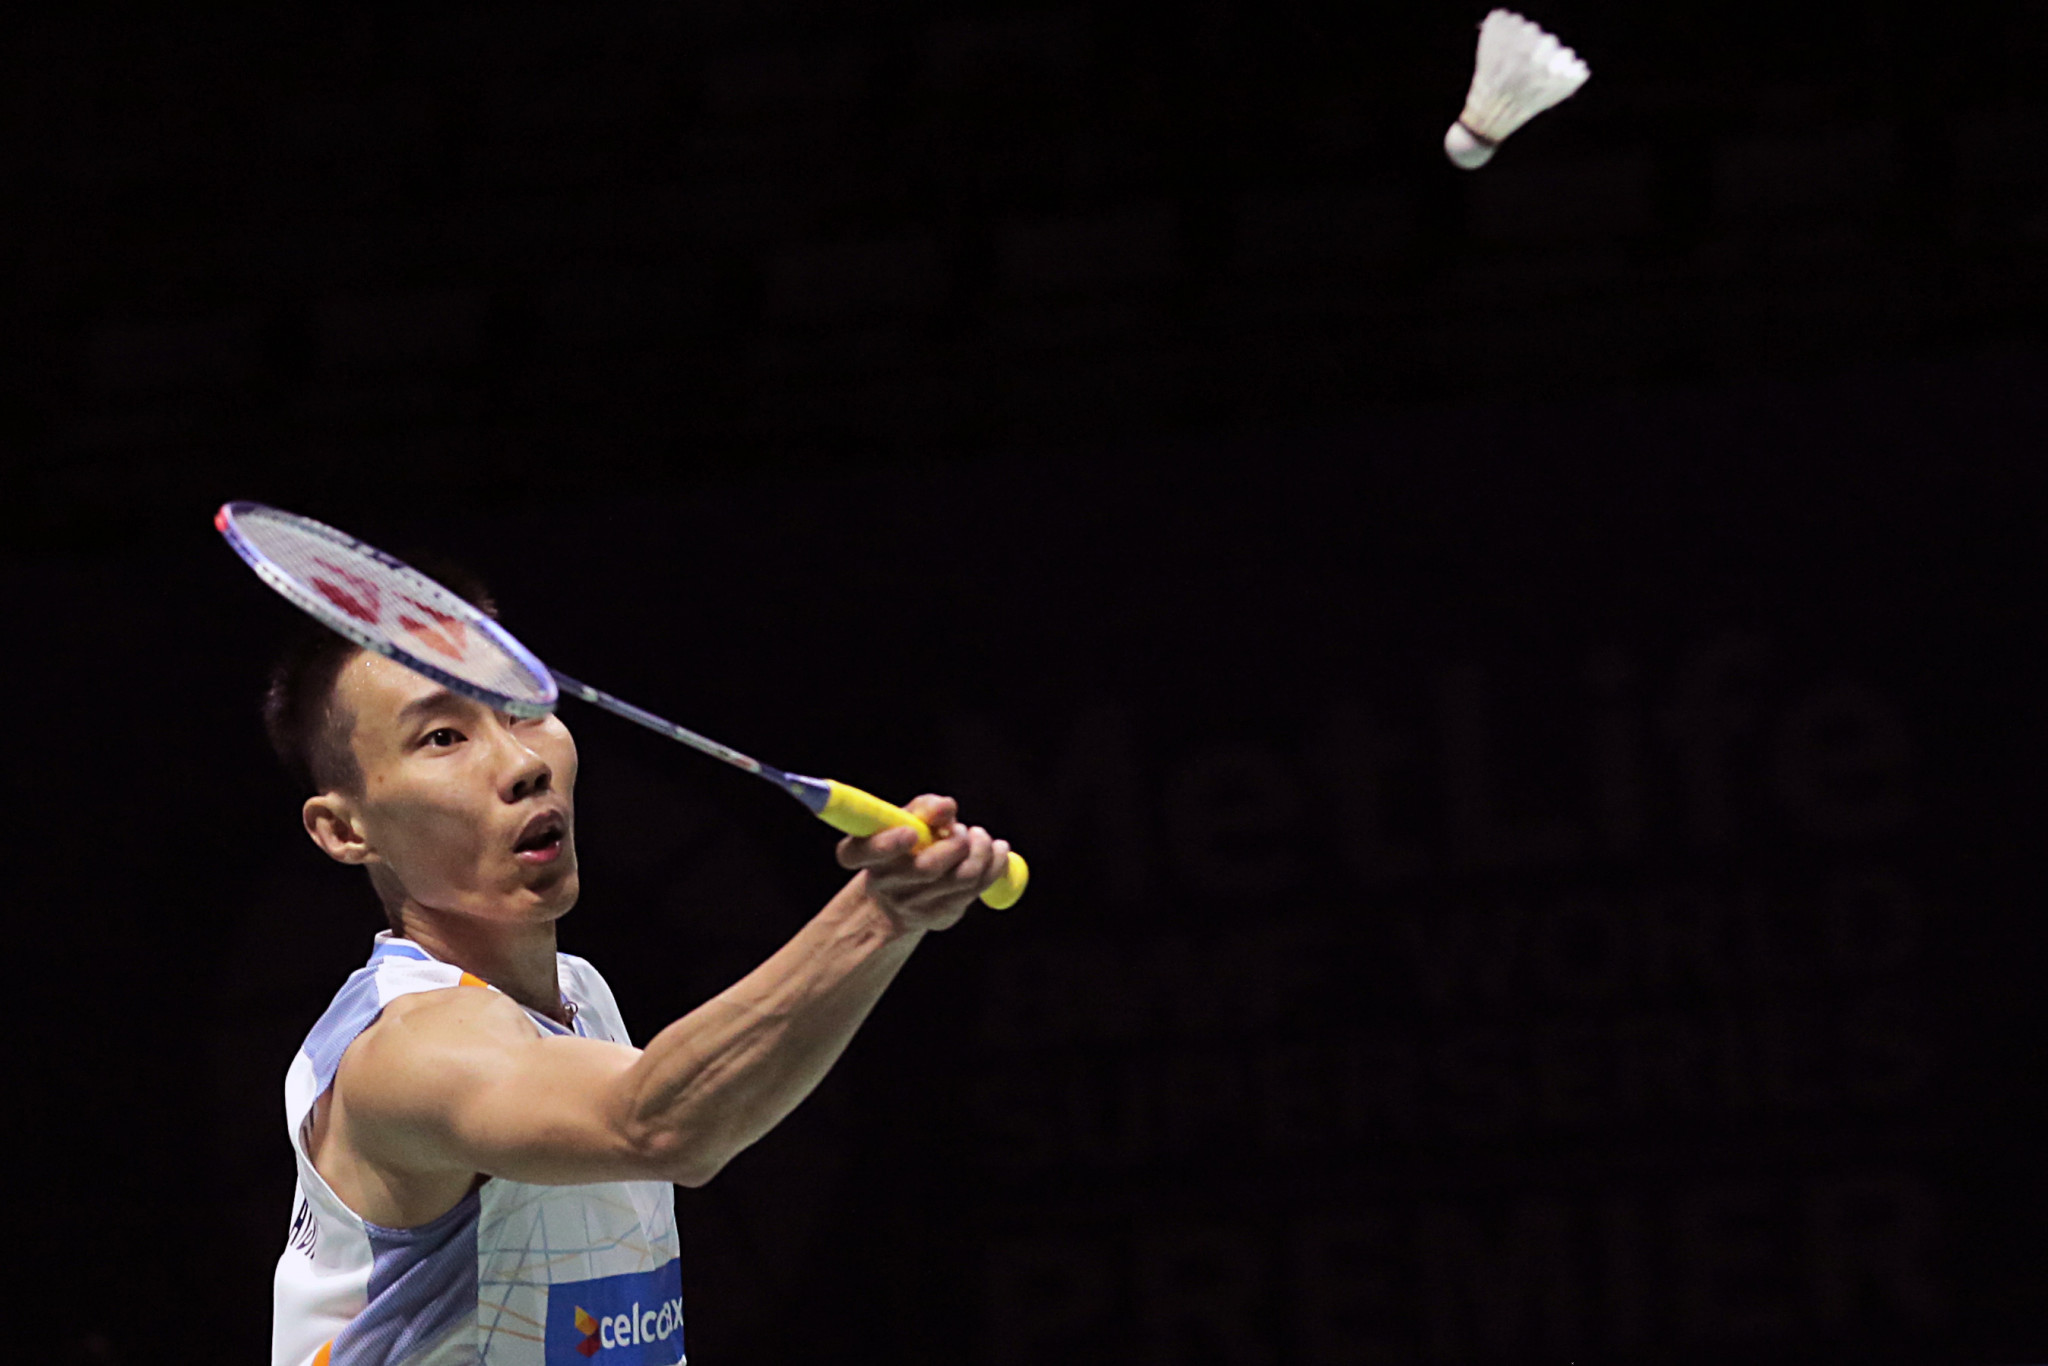 Lee Chong Wei will hope to follow up his BWF Hong Kong Super Series title with victory in tomorrow's final in Dubai ©Getty Images